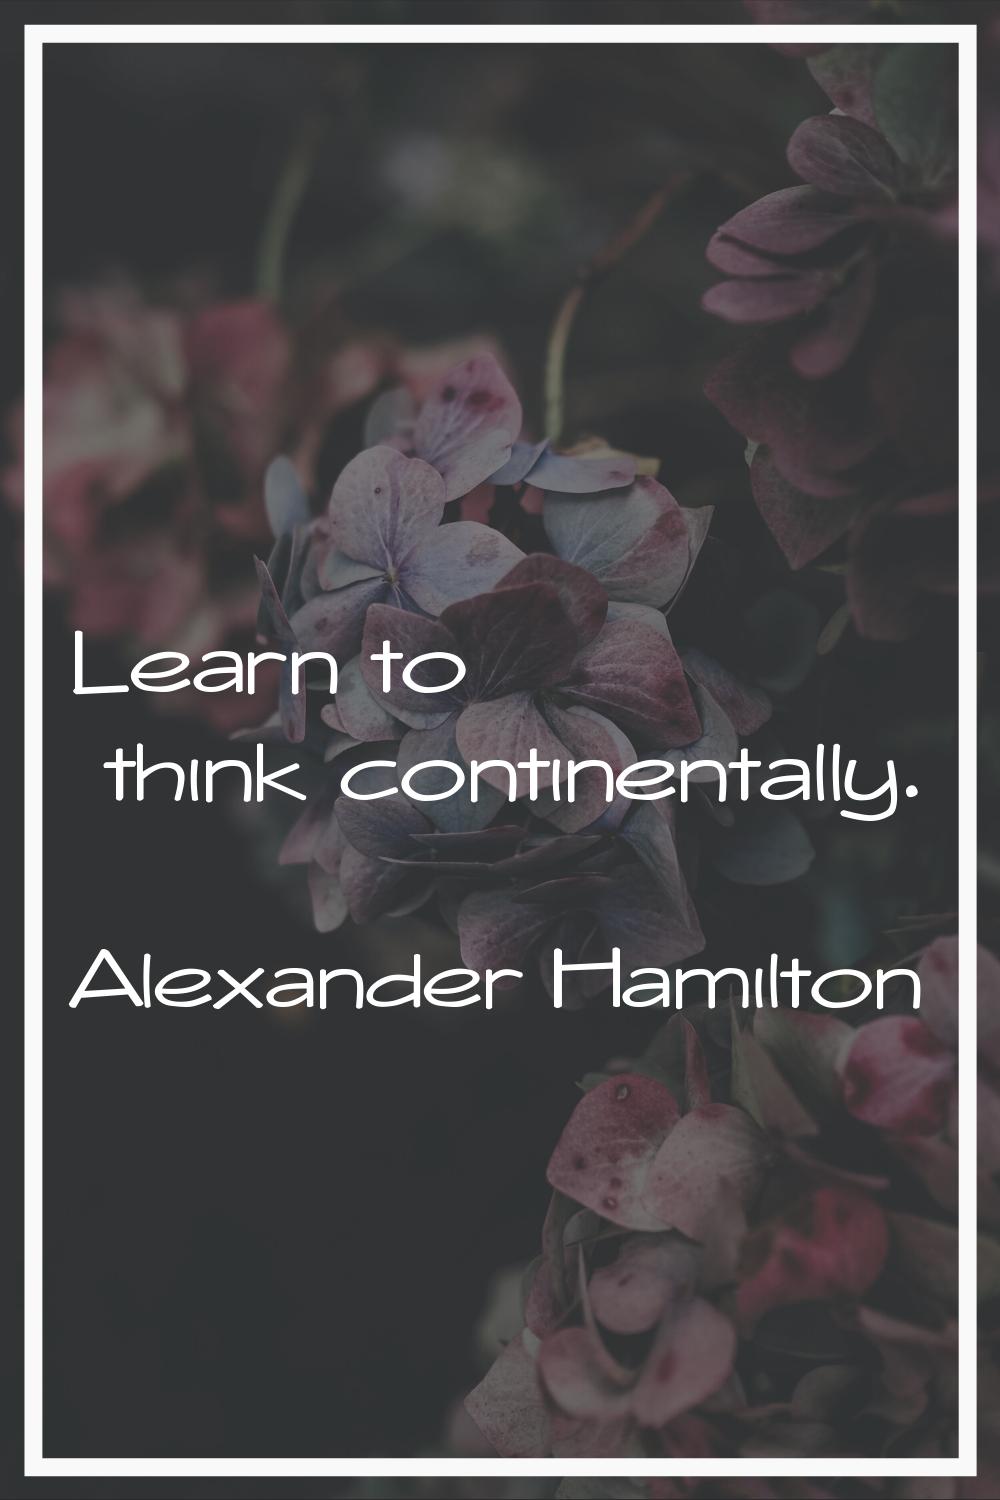 Learn to think continentally.